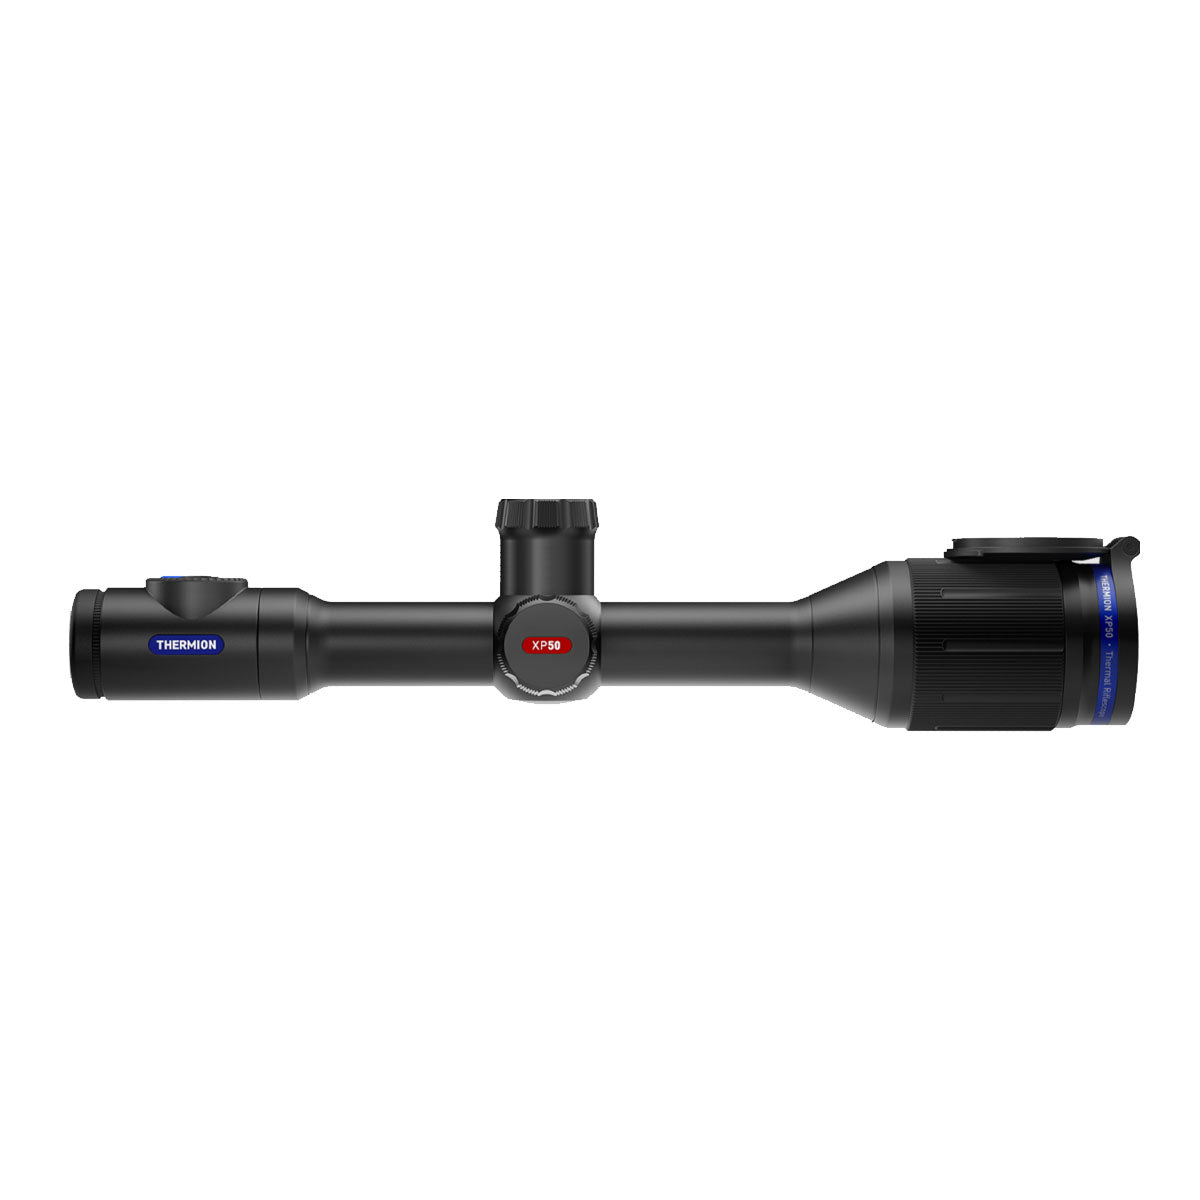 Pulsar Thermion XP50 Thermal Imaging Scope side